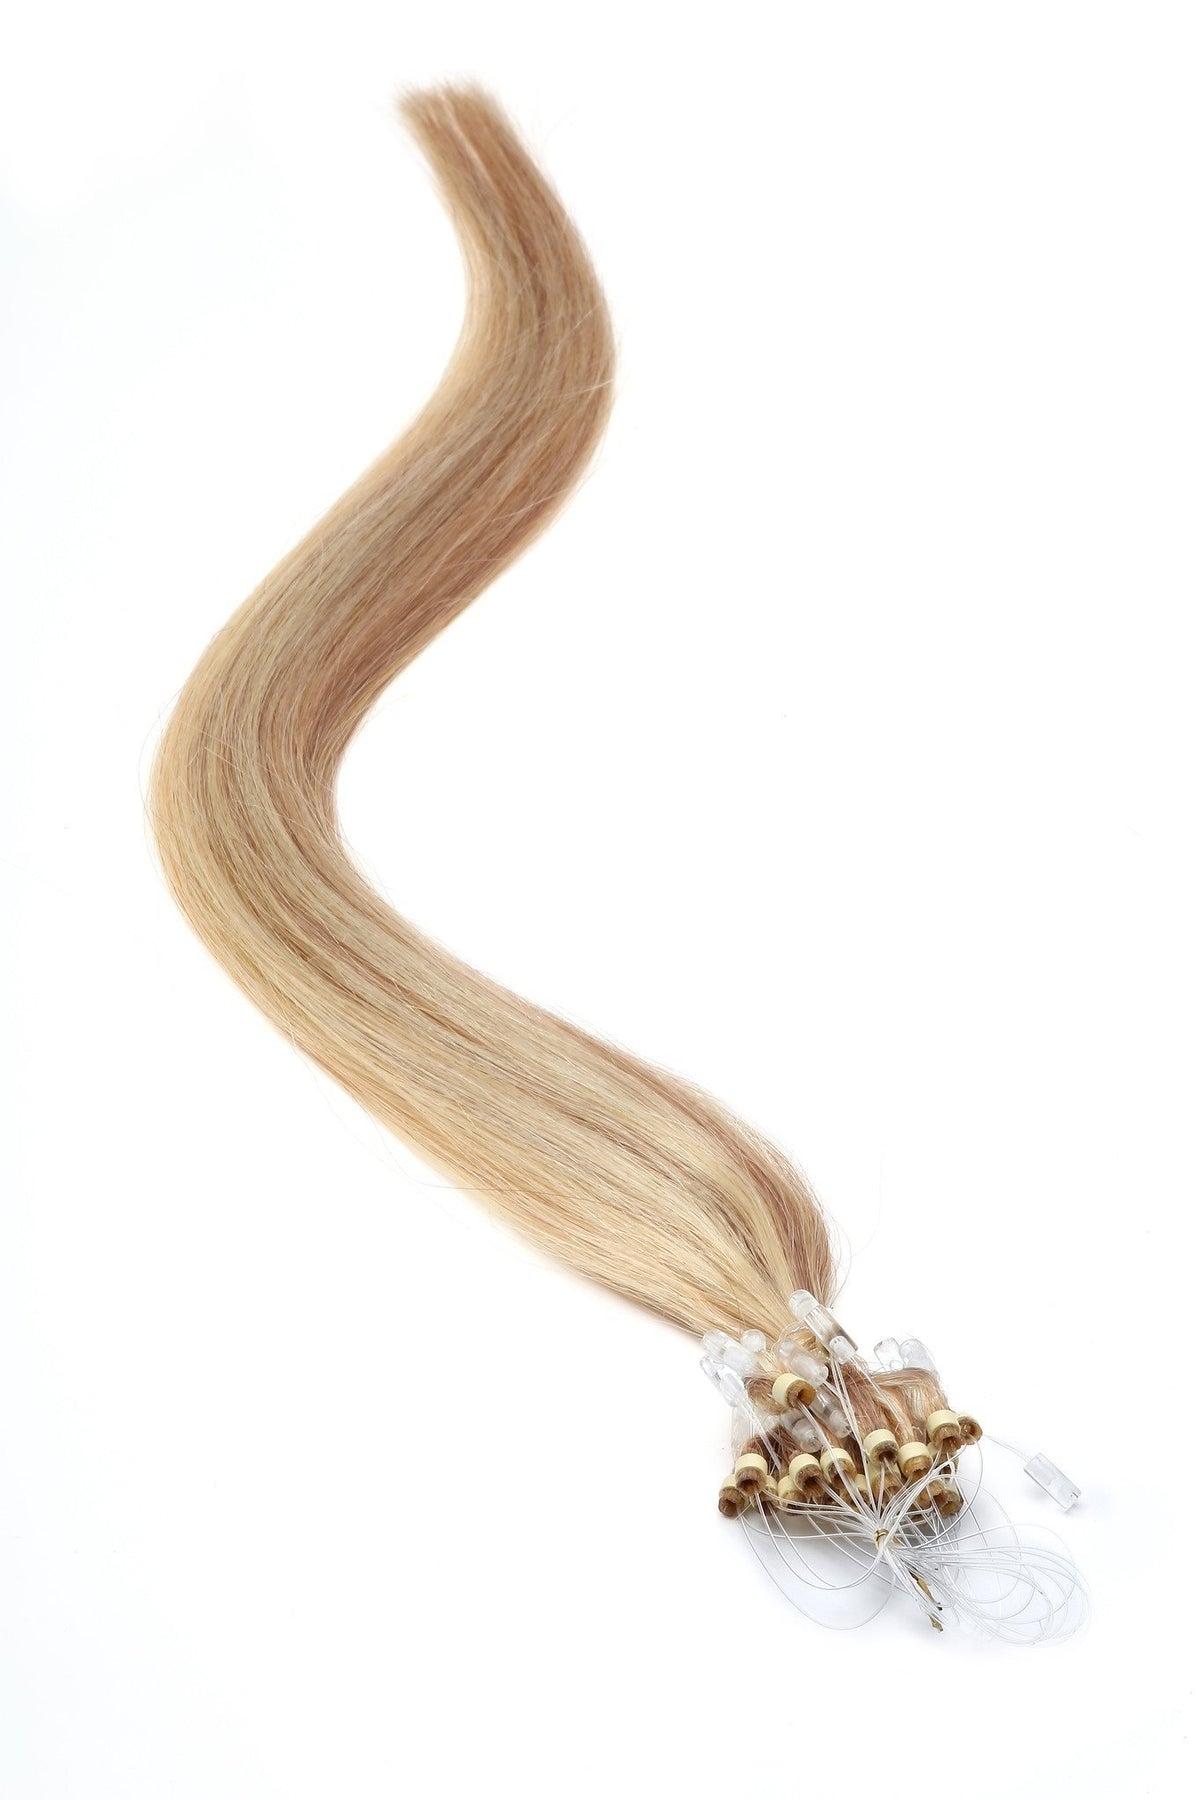 Micro Ring Hair Extensions | 18 inch | Light Brown Blonde (10-22Mix) - Beauty Hair Products LtdHair Extensions